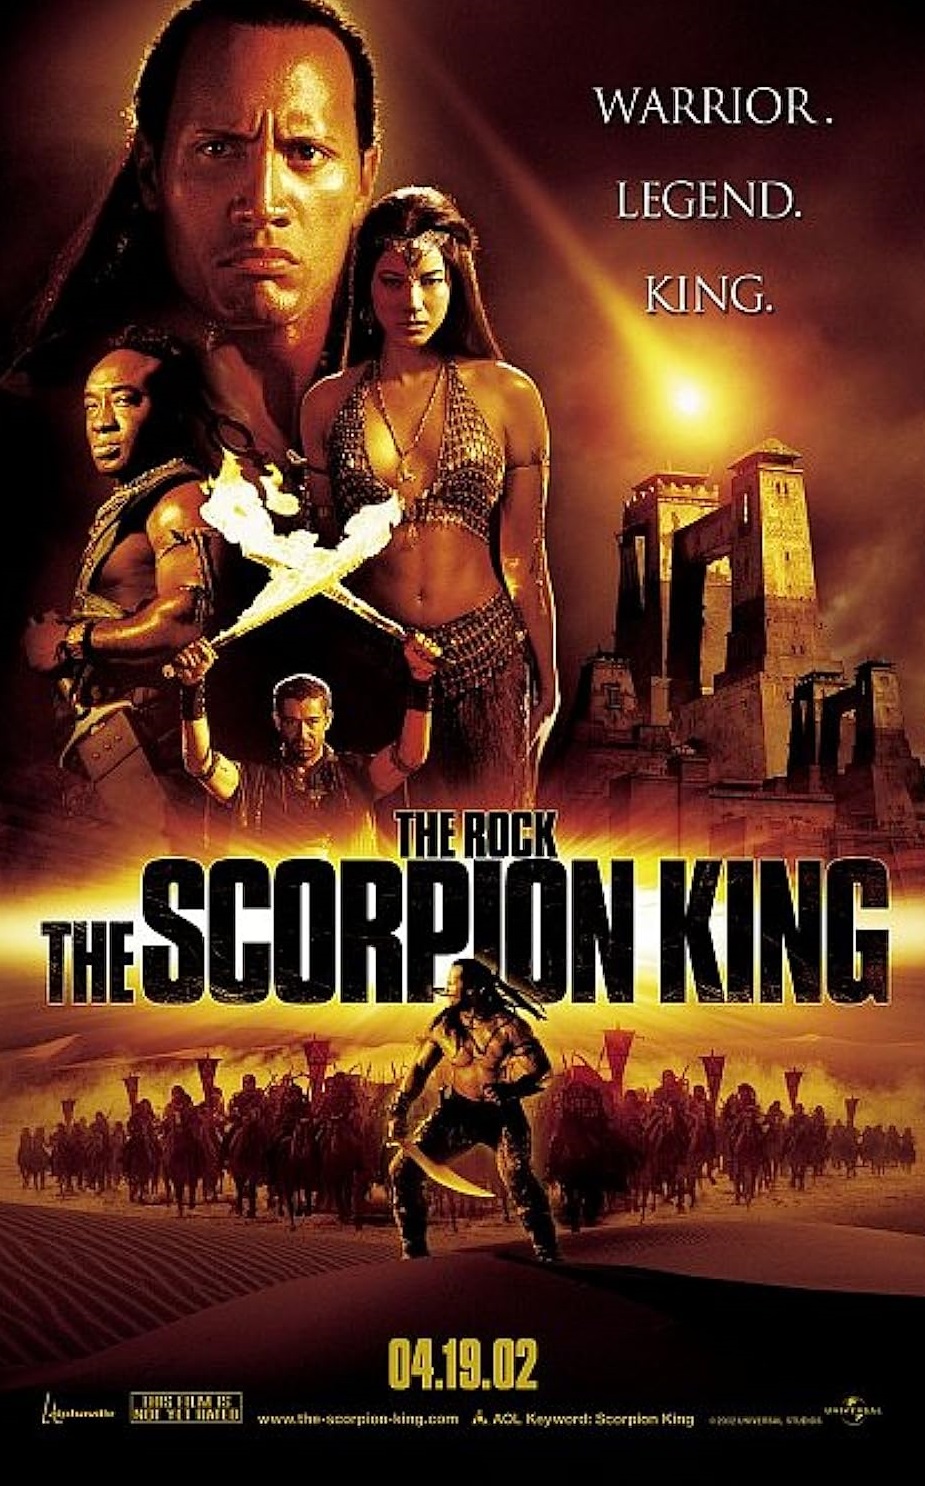 The Scorpion King 2002 Tamil Dubbed Action Movie Online